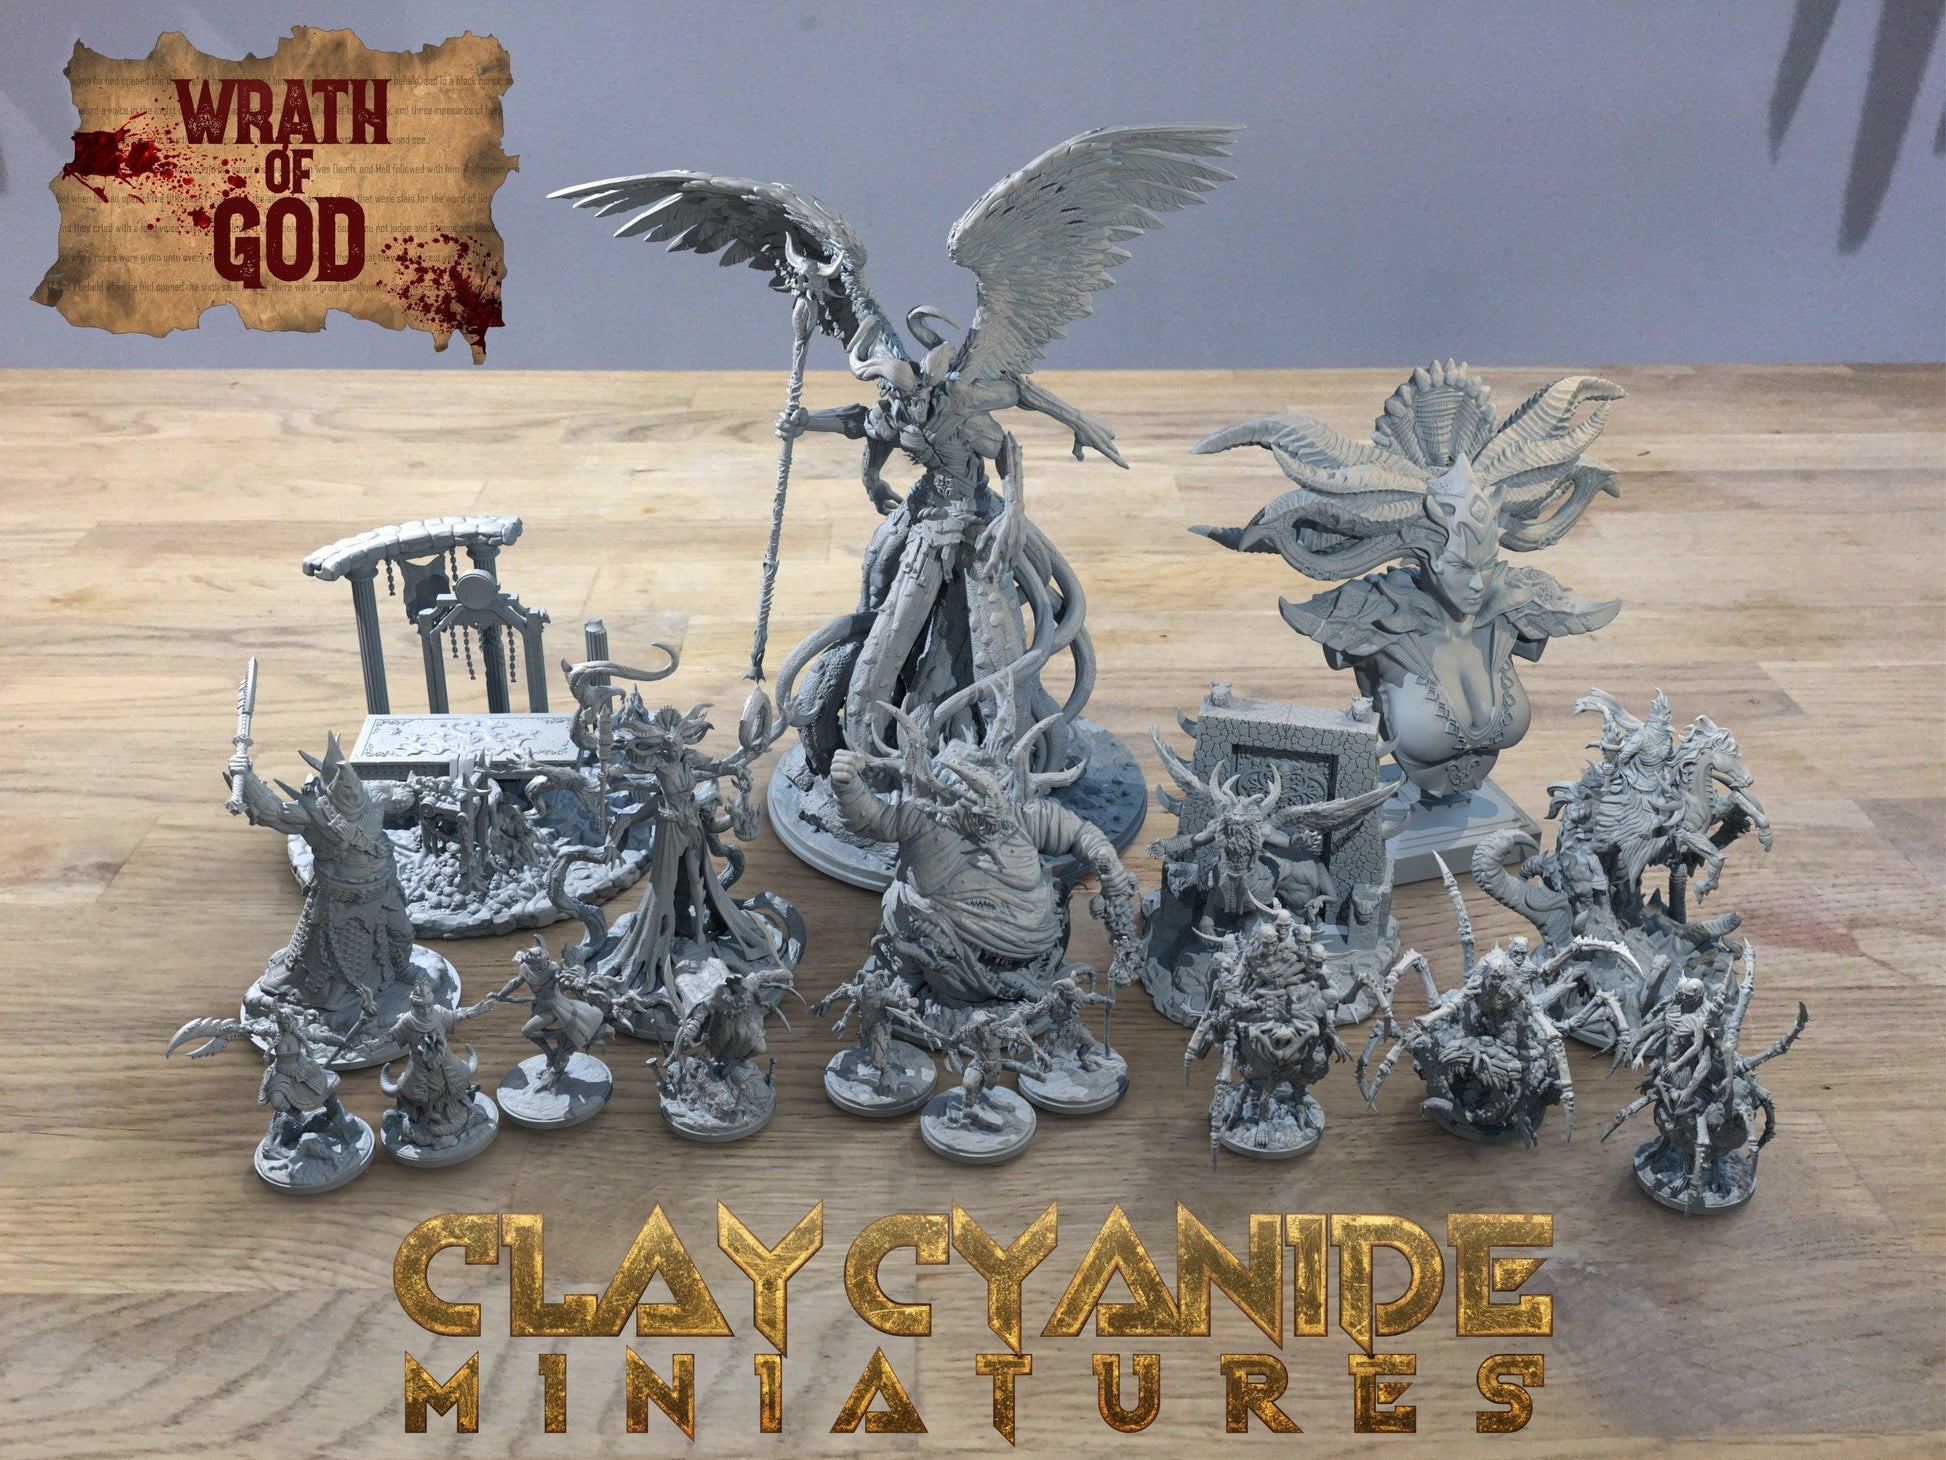 Cursed Blade miniature | Clay Cyanide | Wrath of God | Tabletop Gaming | DnD Miniature | Dungeons and Dragons DnD monster manual - Plague Miniatures shop for DnD Miniatures